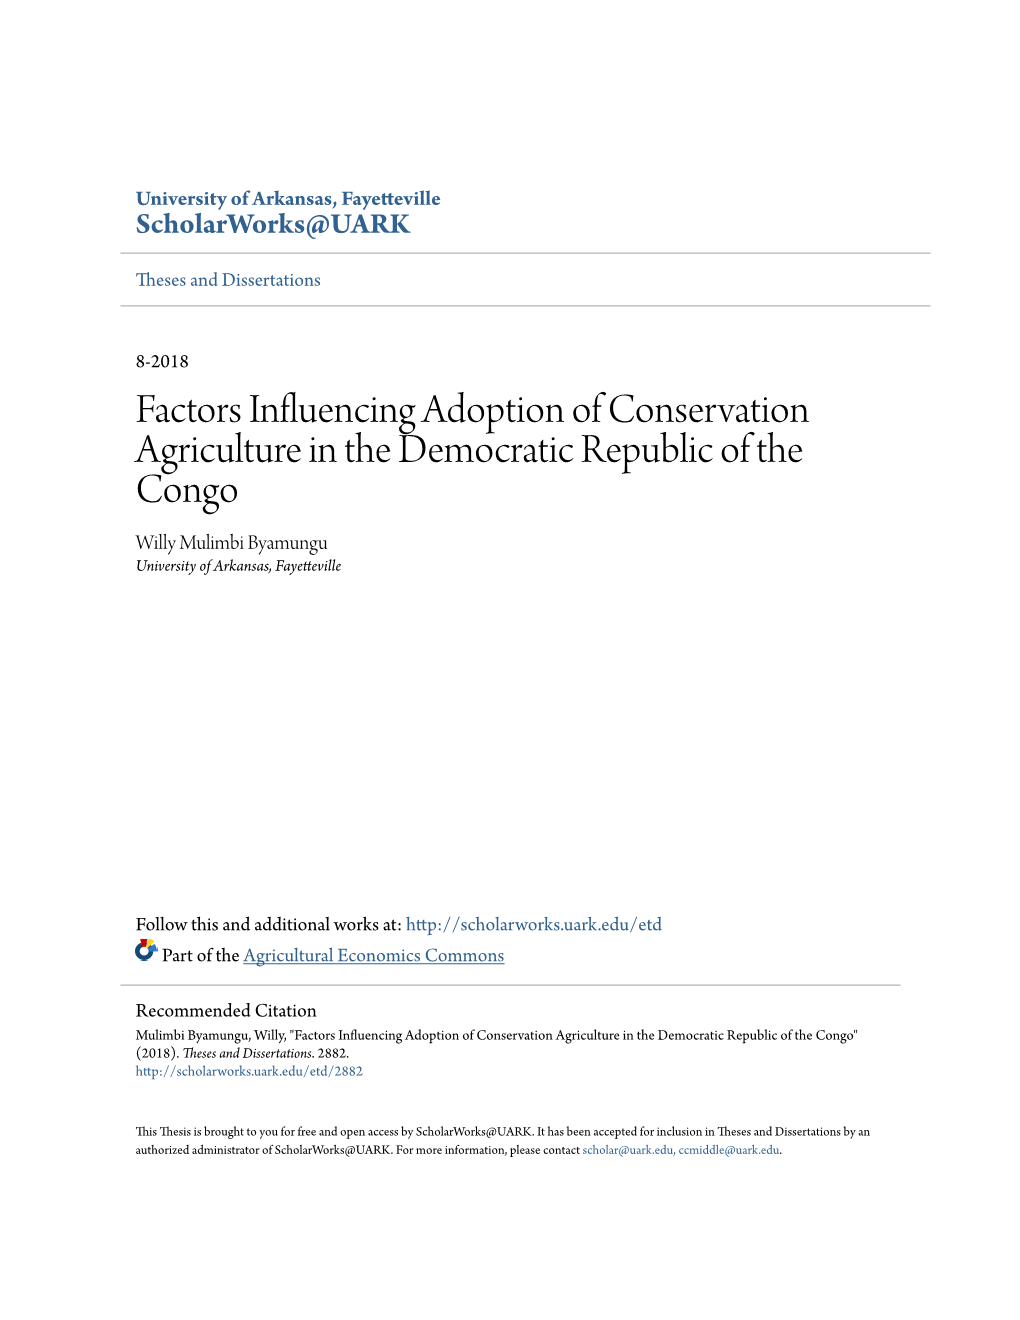 Factors Influencing Adoption of Conservation Agriculture in the Democratic Republic of the Congo Willy Mulimbi Byamungu University of Arkansas, Fayetteville